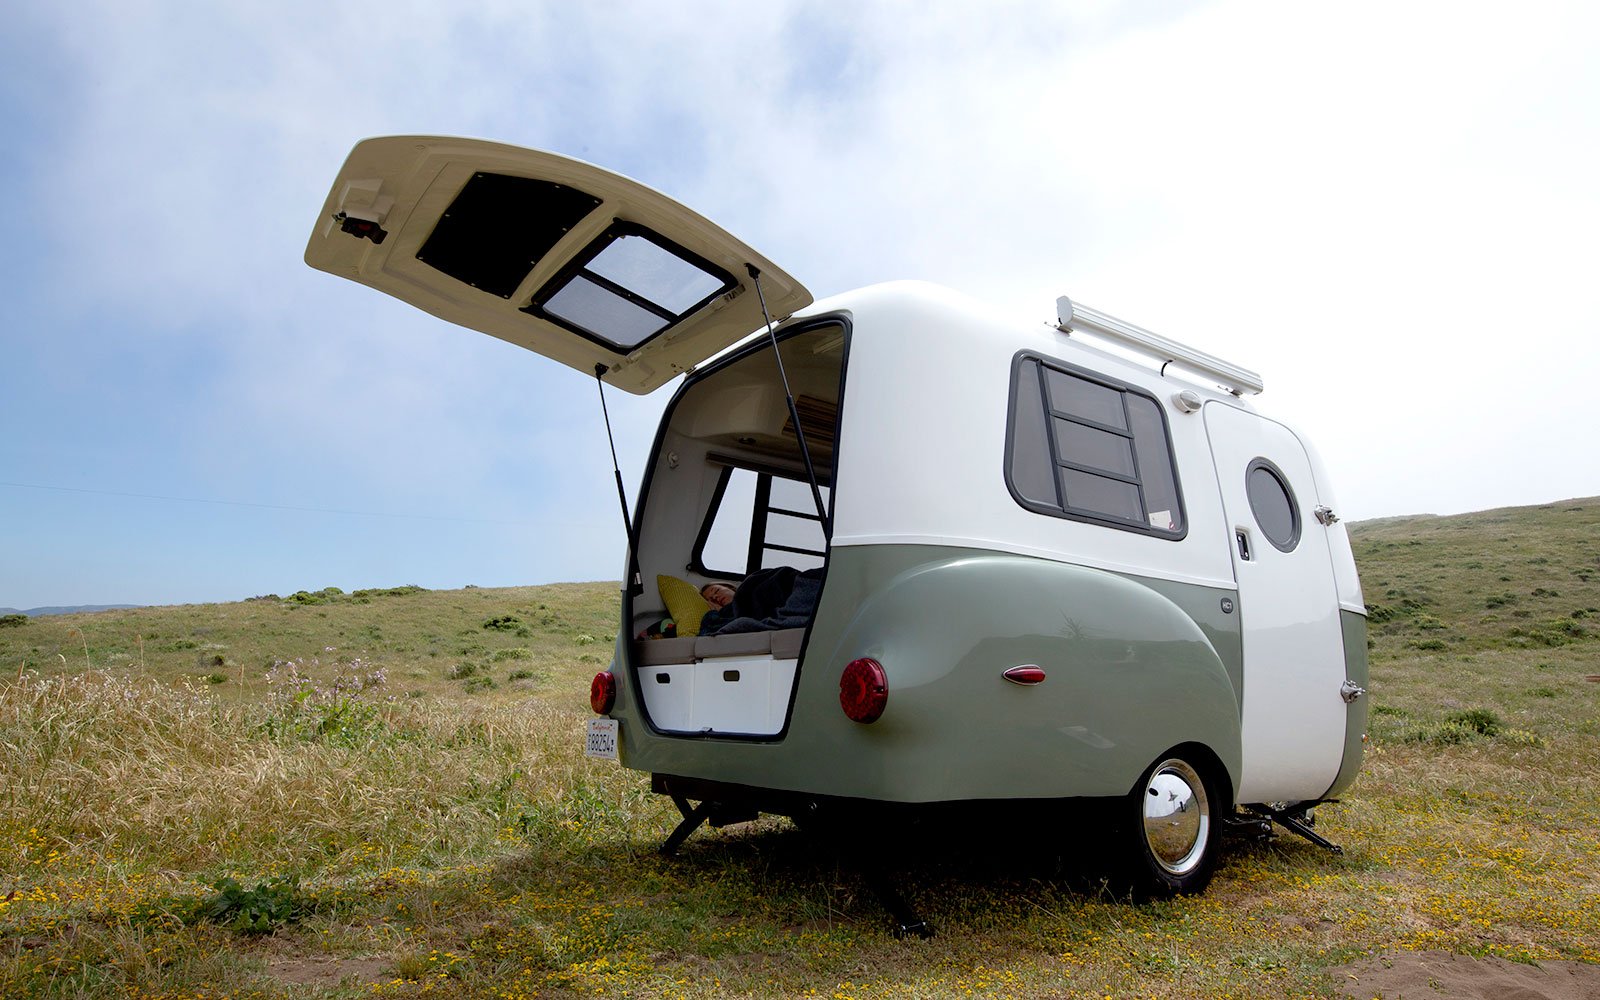 How Much Does Happier Camper Cost?